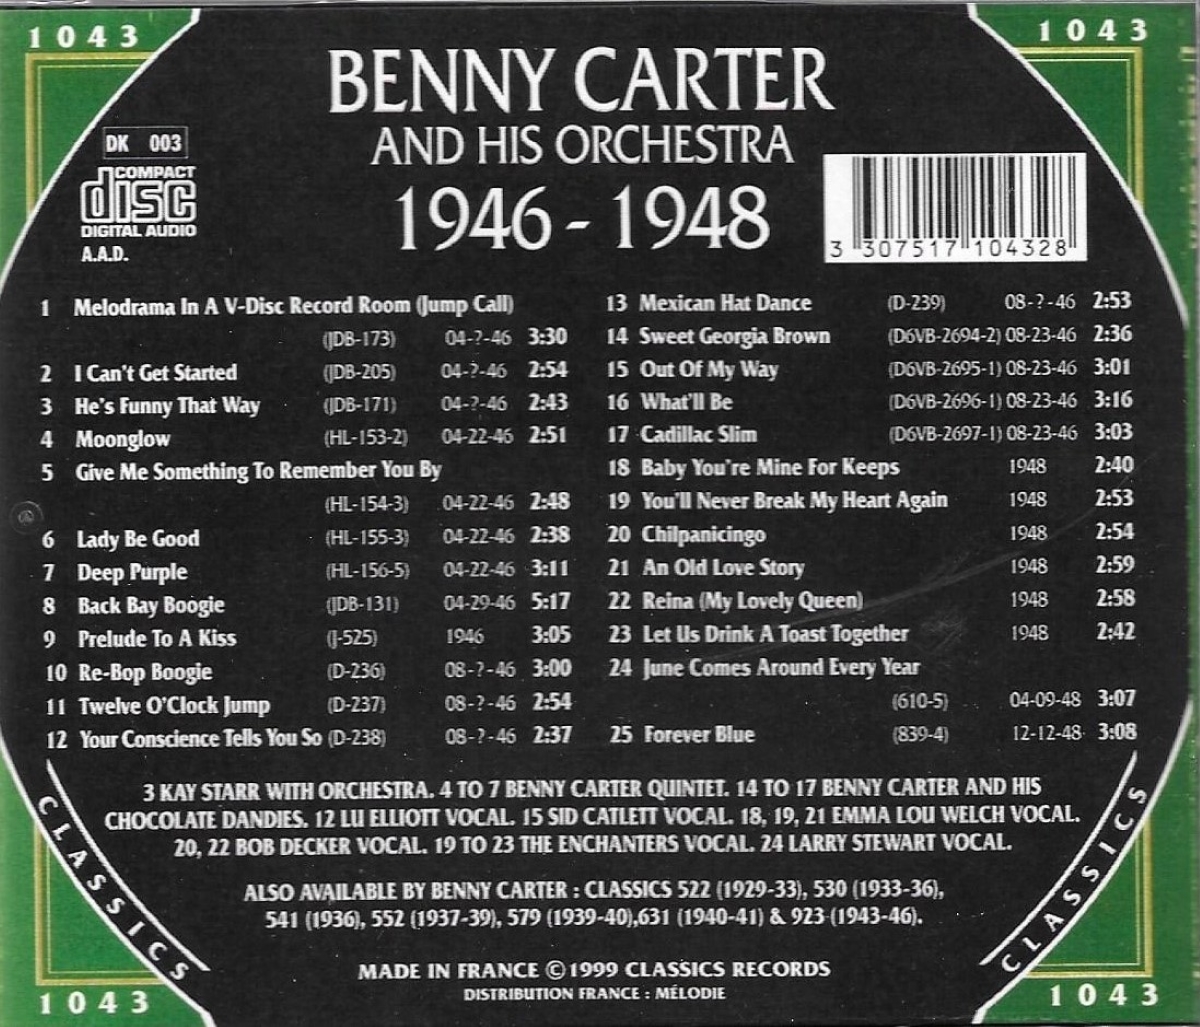 The Chonological Benny Carter And His Orchestra-1946-1948